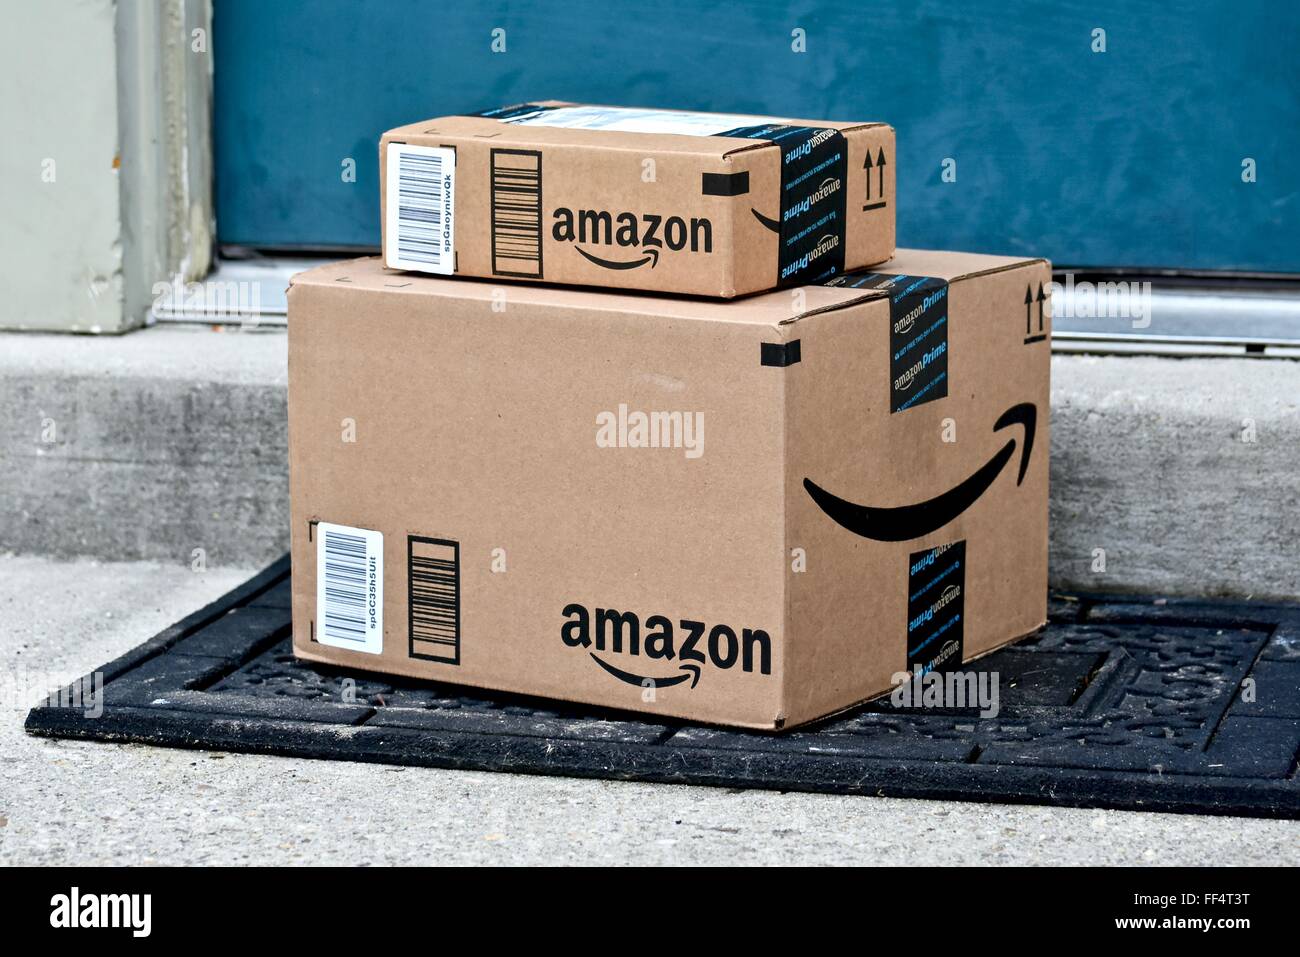 Amazon boxes delivered to a home Stock Photo - Alamy